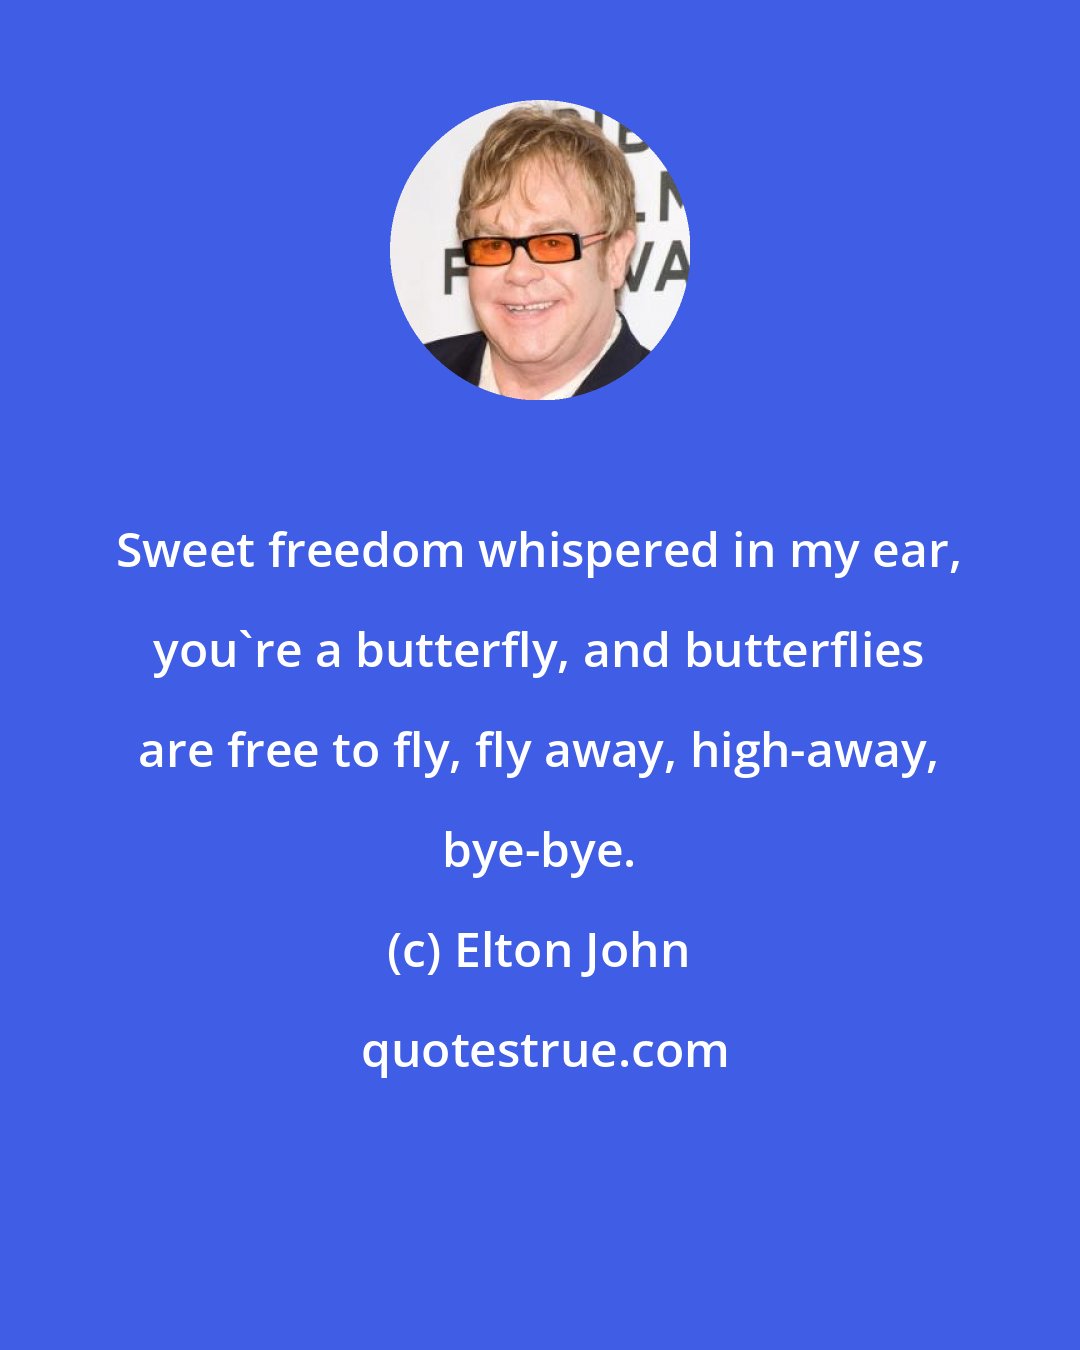 Elton John: Sweet freedom whispered in my ear, you're a butterfly, and butterflies are free to fly, fly away, high-away, bye-bye.